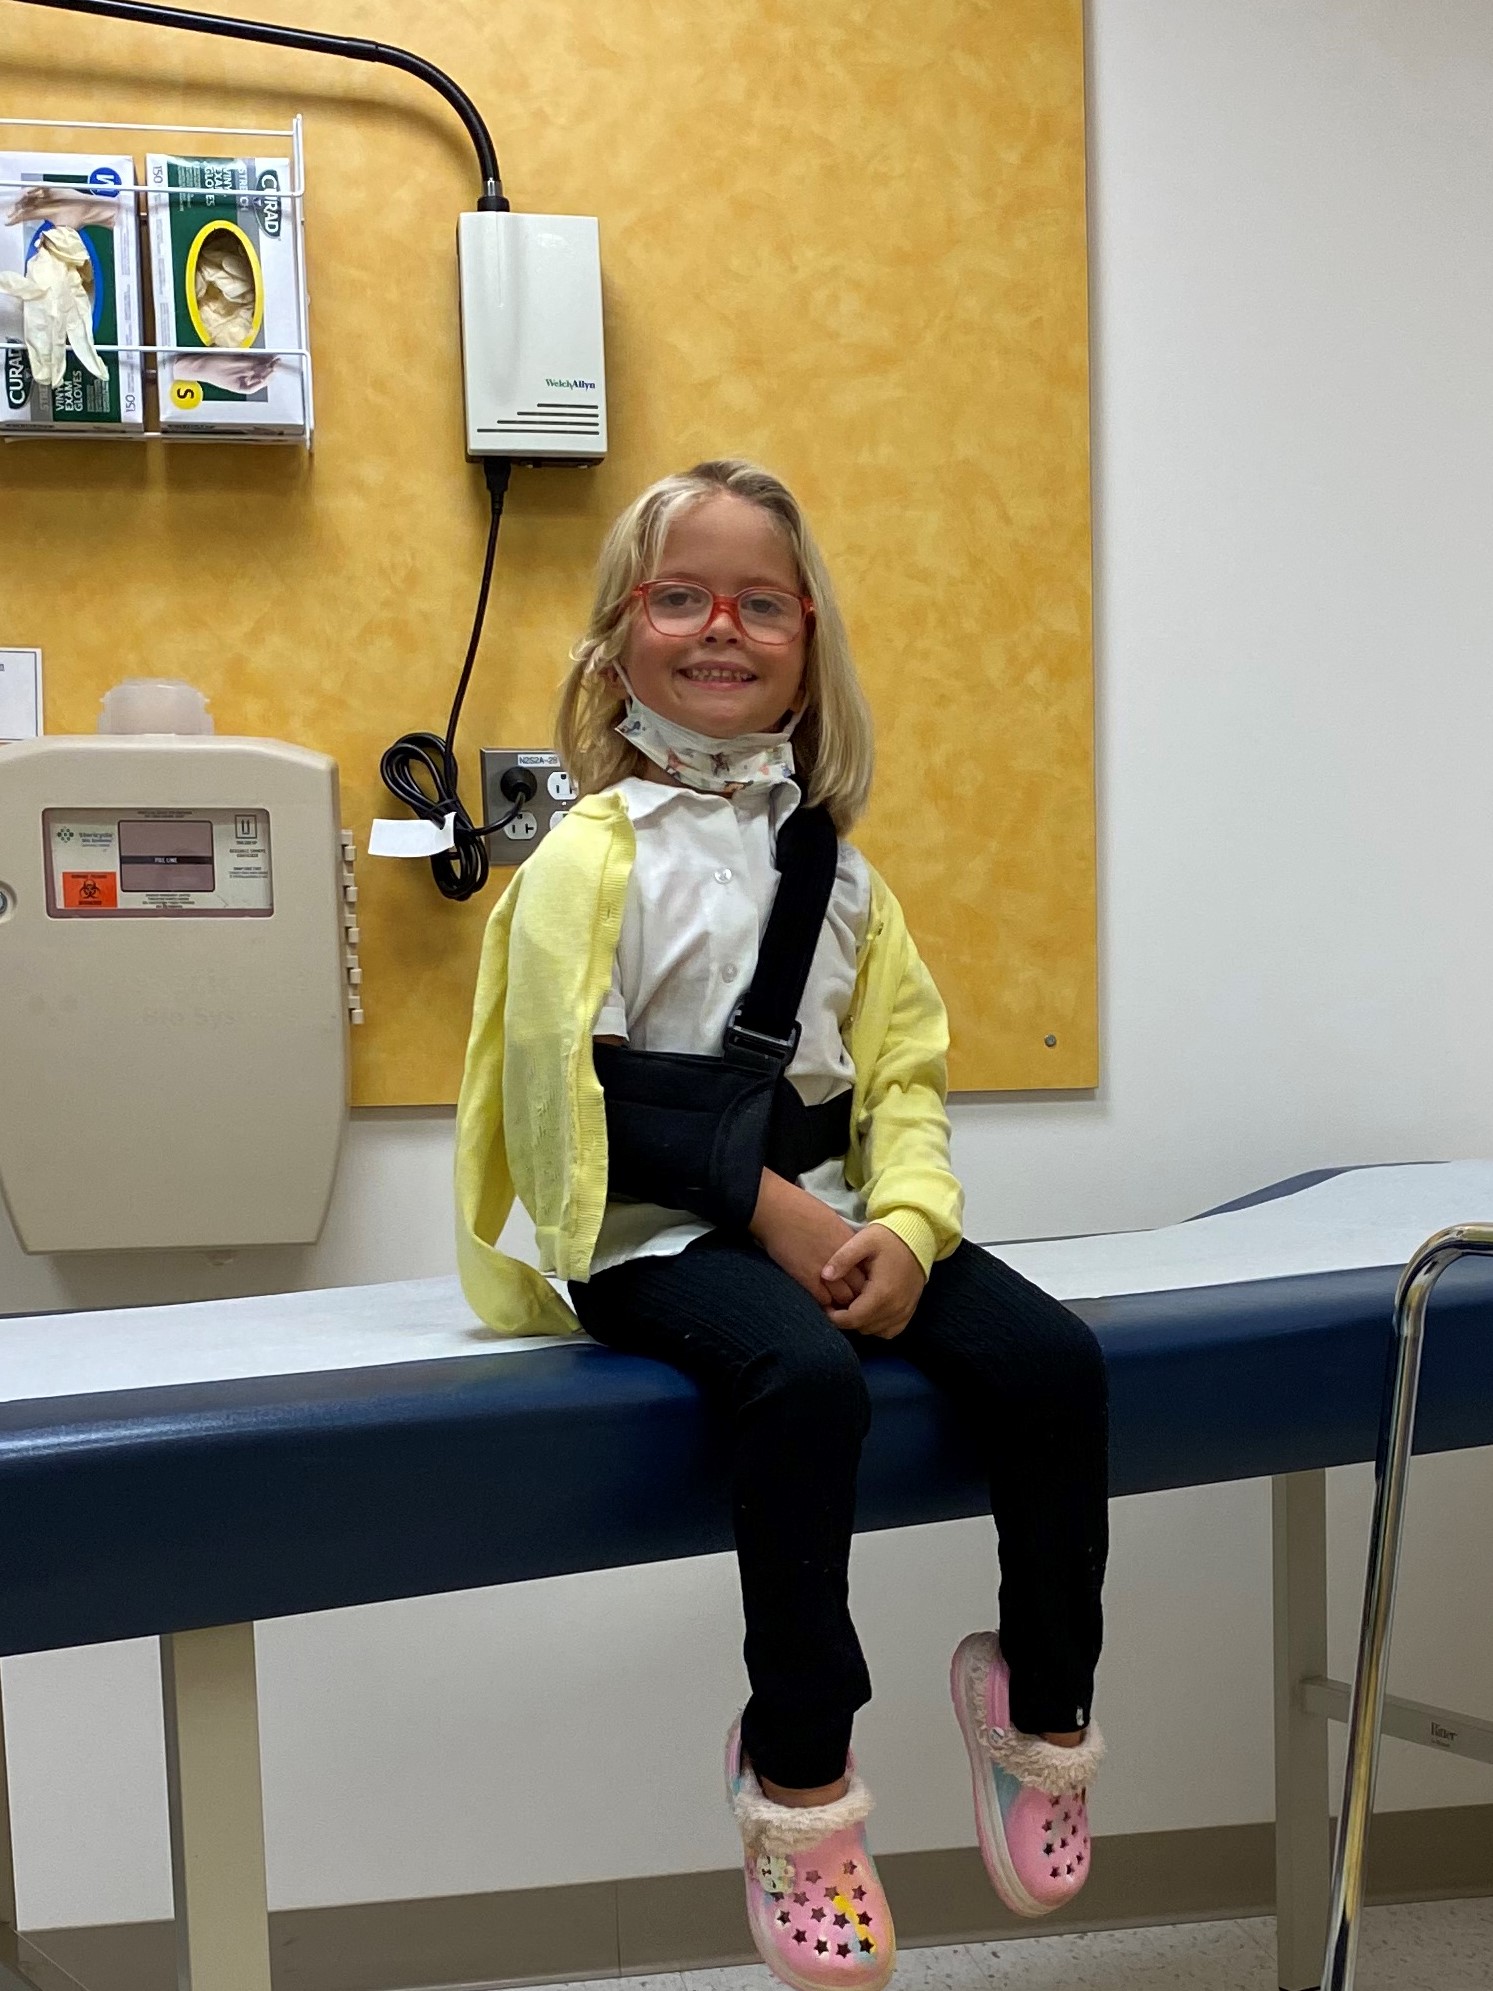 Rosie’s Bracing Story: “It Didn’t Slow Her Down for a Second”